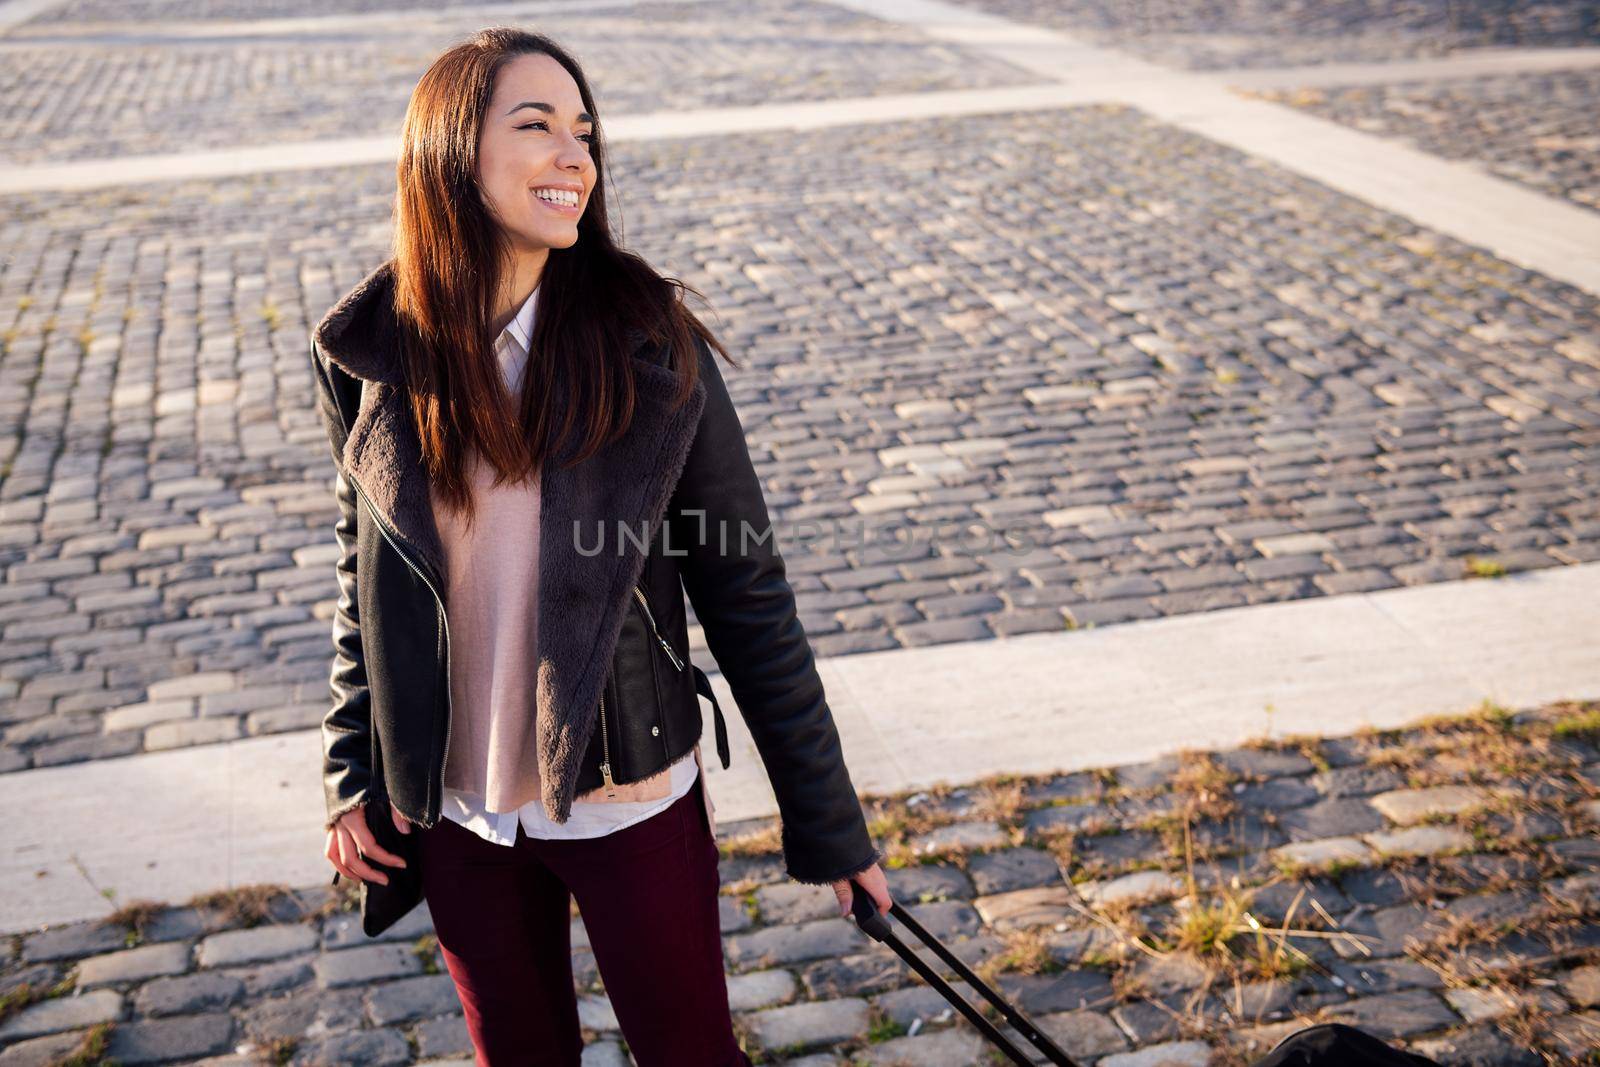 smiling young woman with trolley suitcase in a cobblestone street, concept of travel and urban lifestyle, copyspace for text